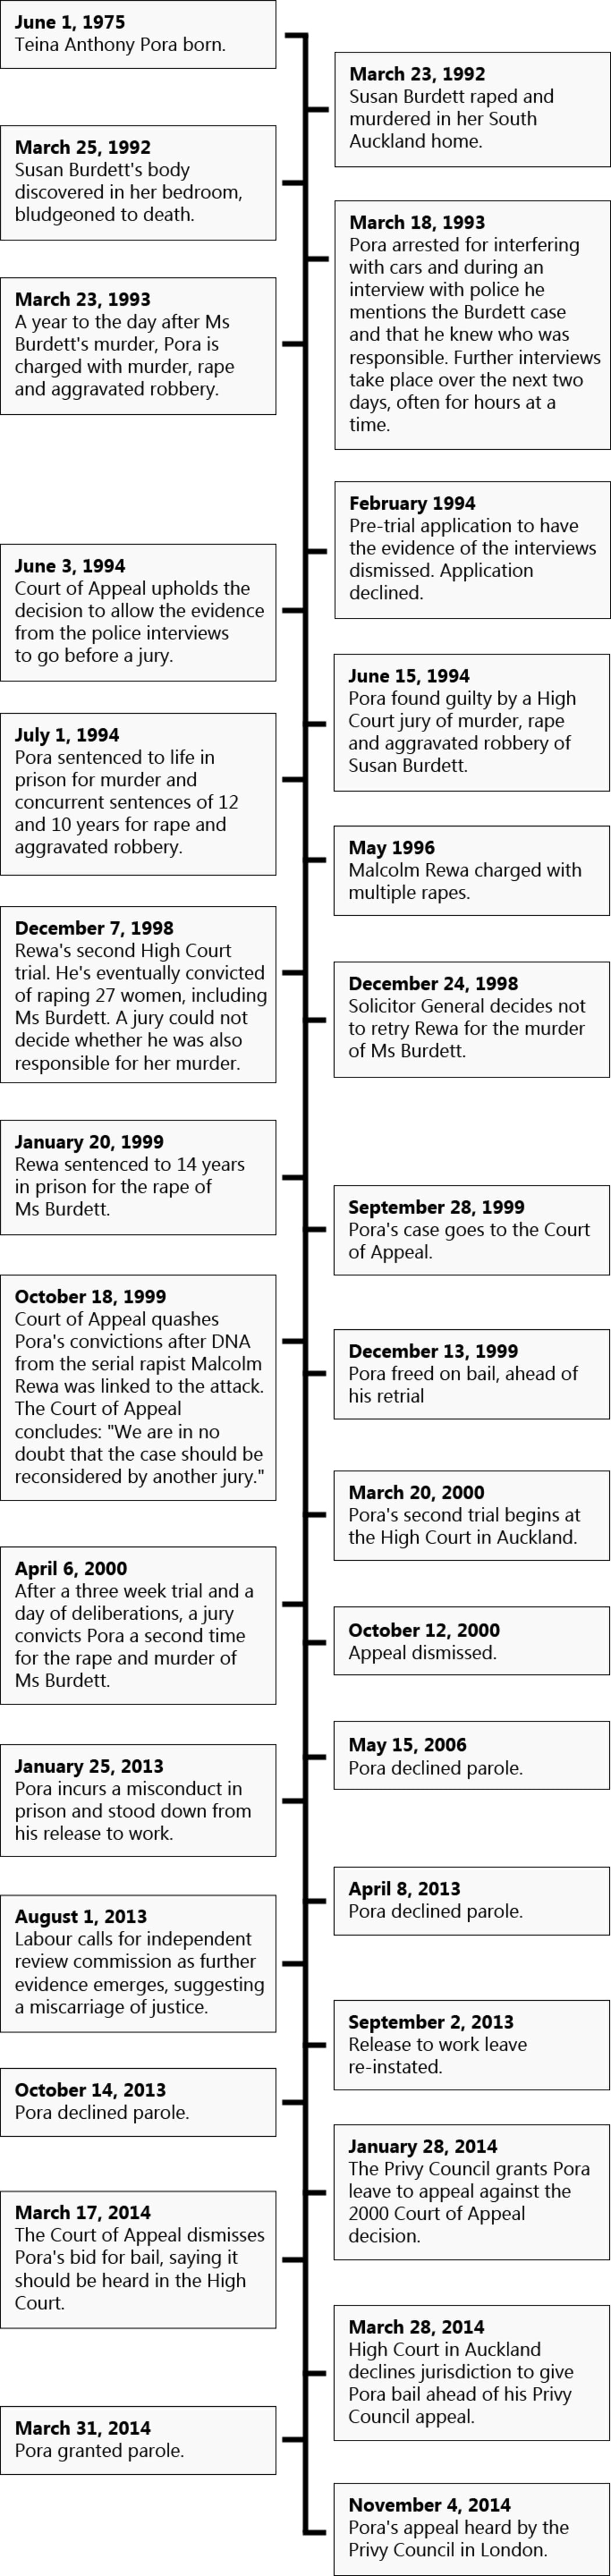 A timeline of Teina Pora's case and life